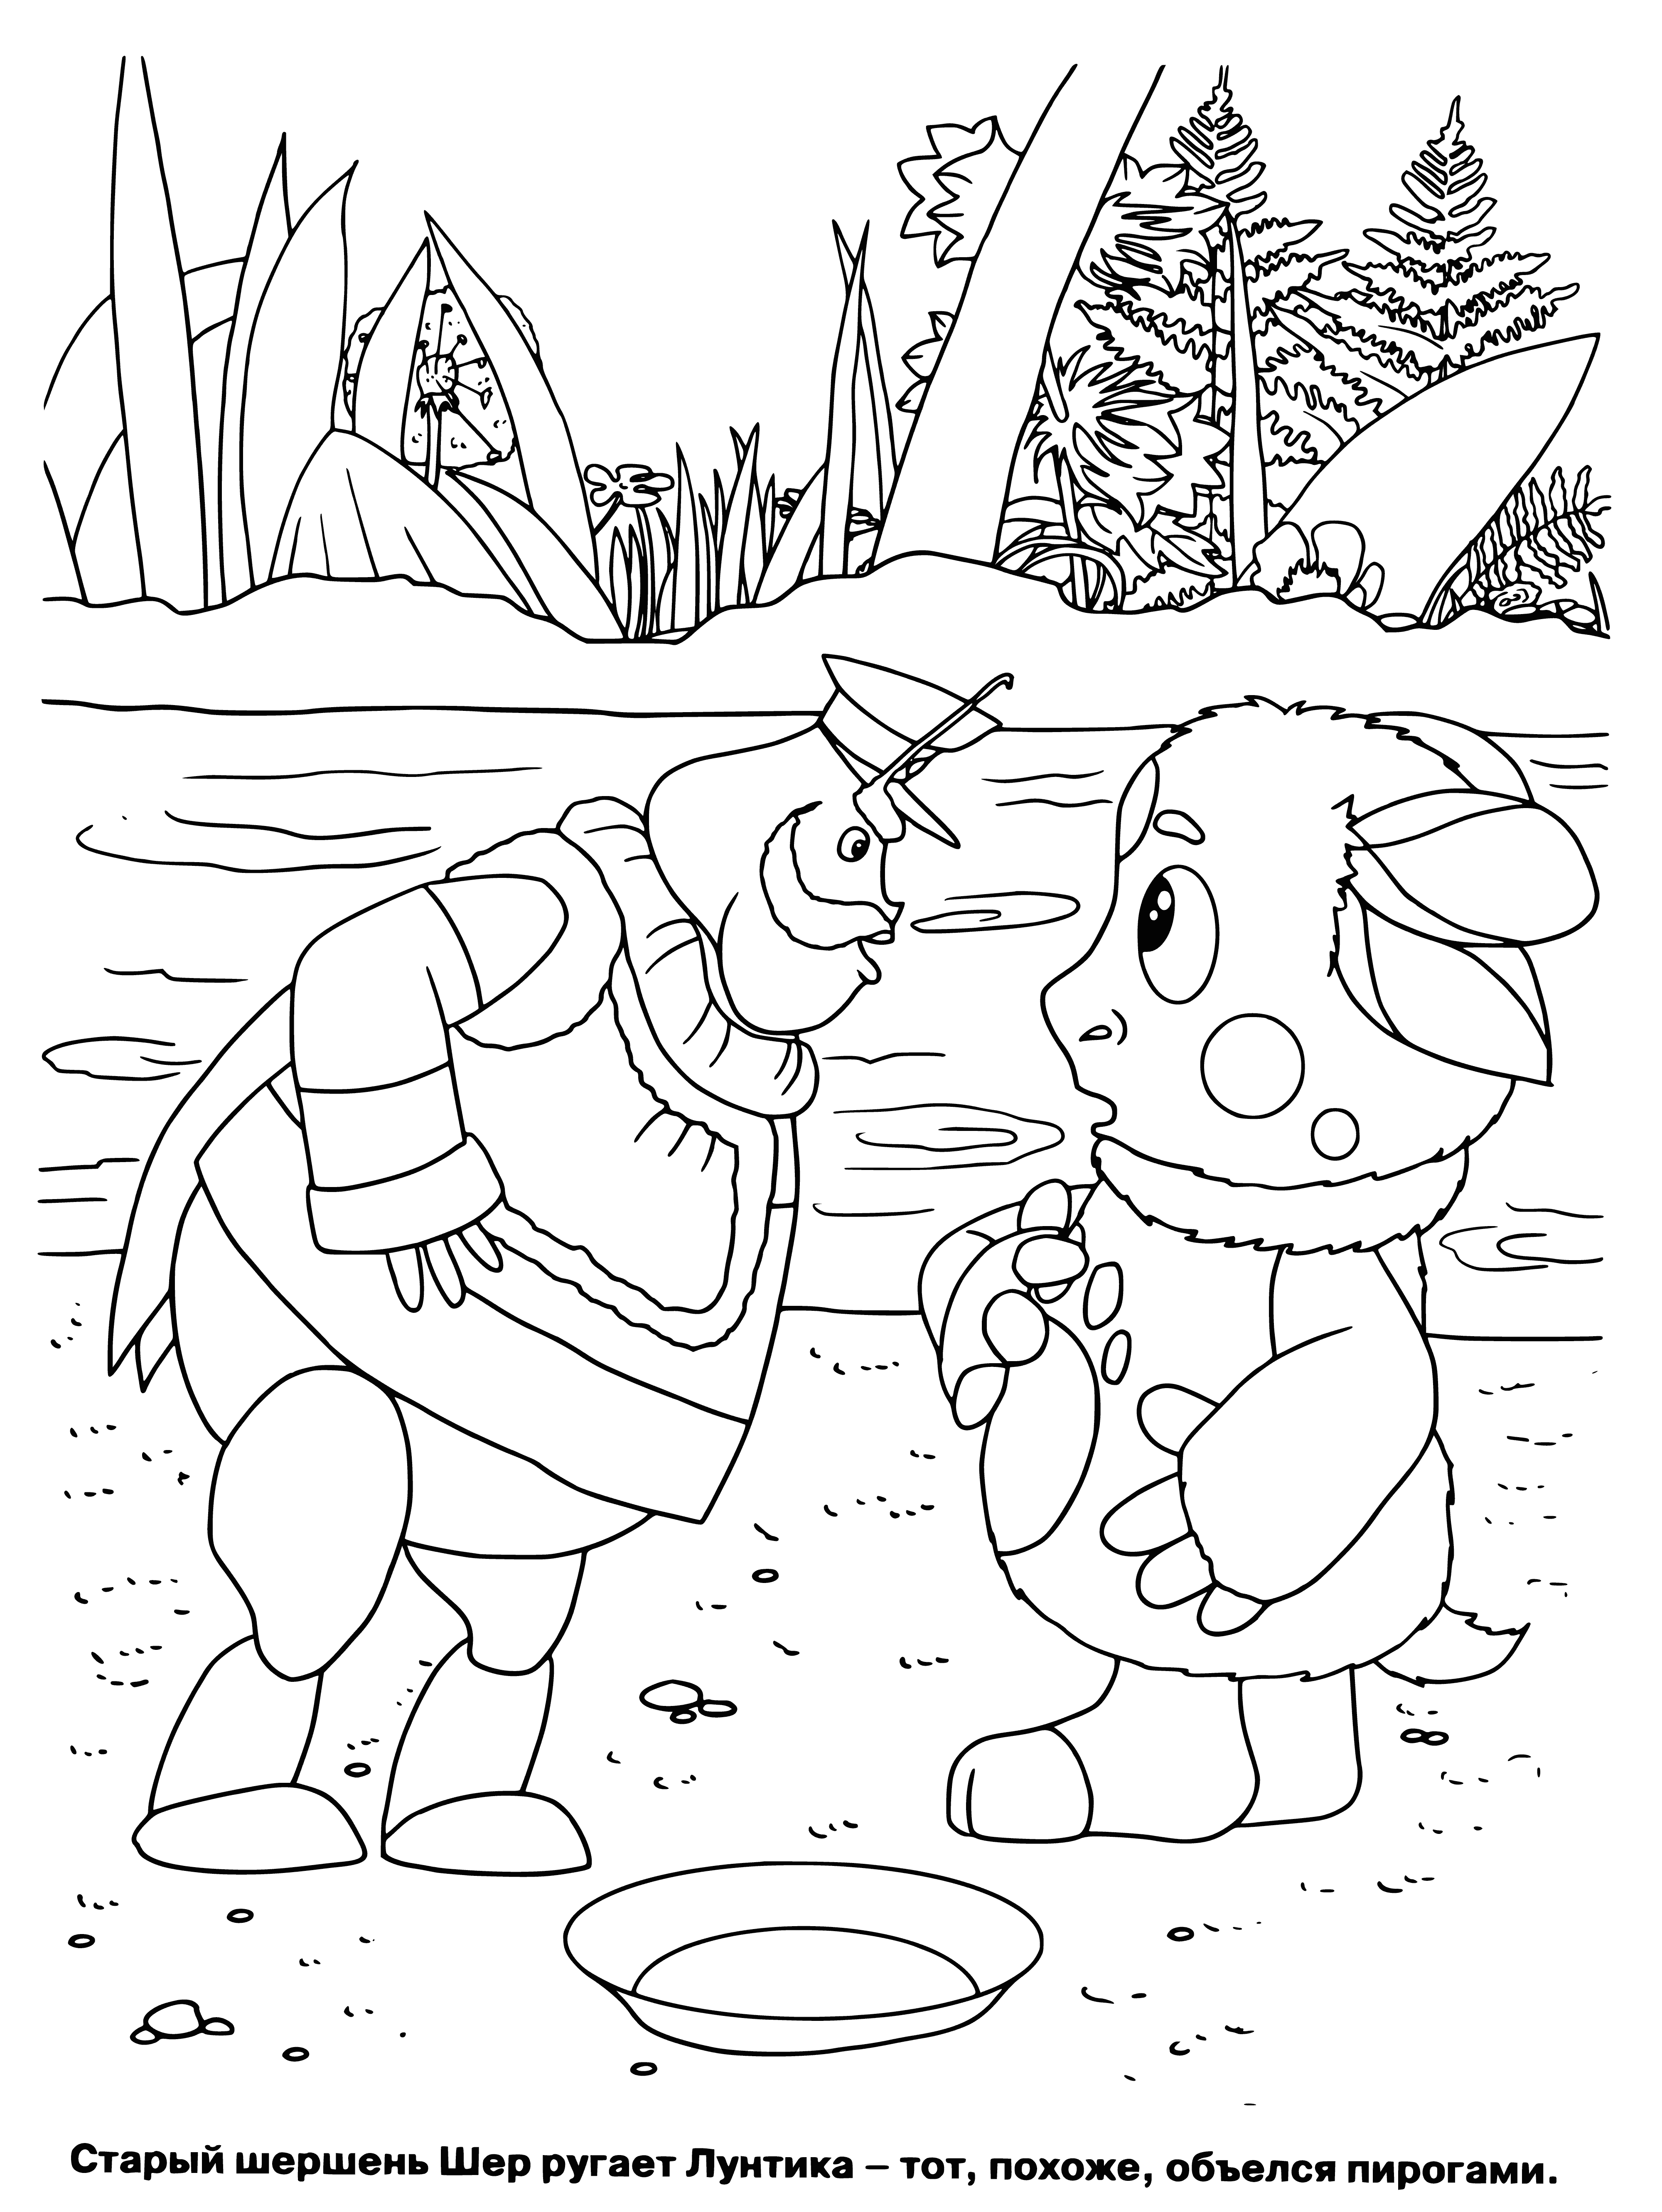 coloring page: Luntik and General Cher are best friends, both small creatures with big eyes and thin arms/legs.